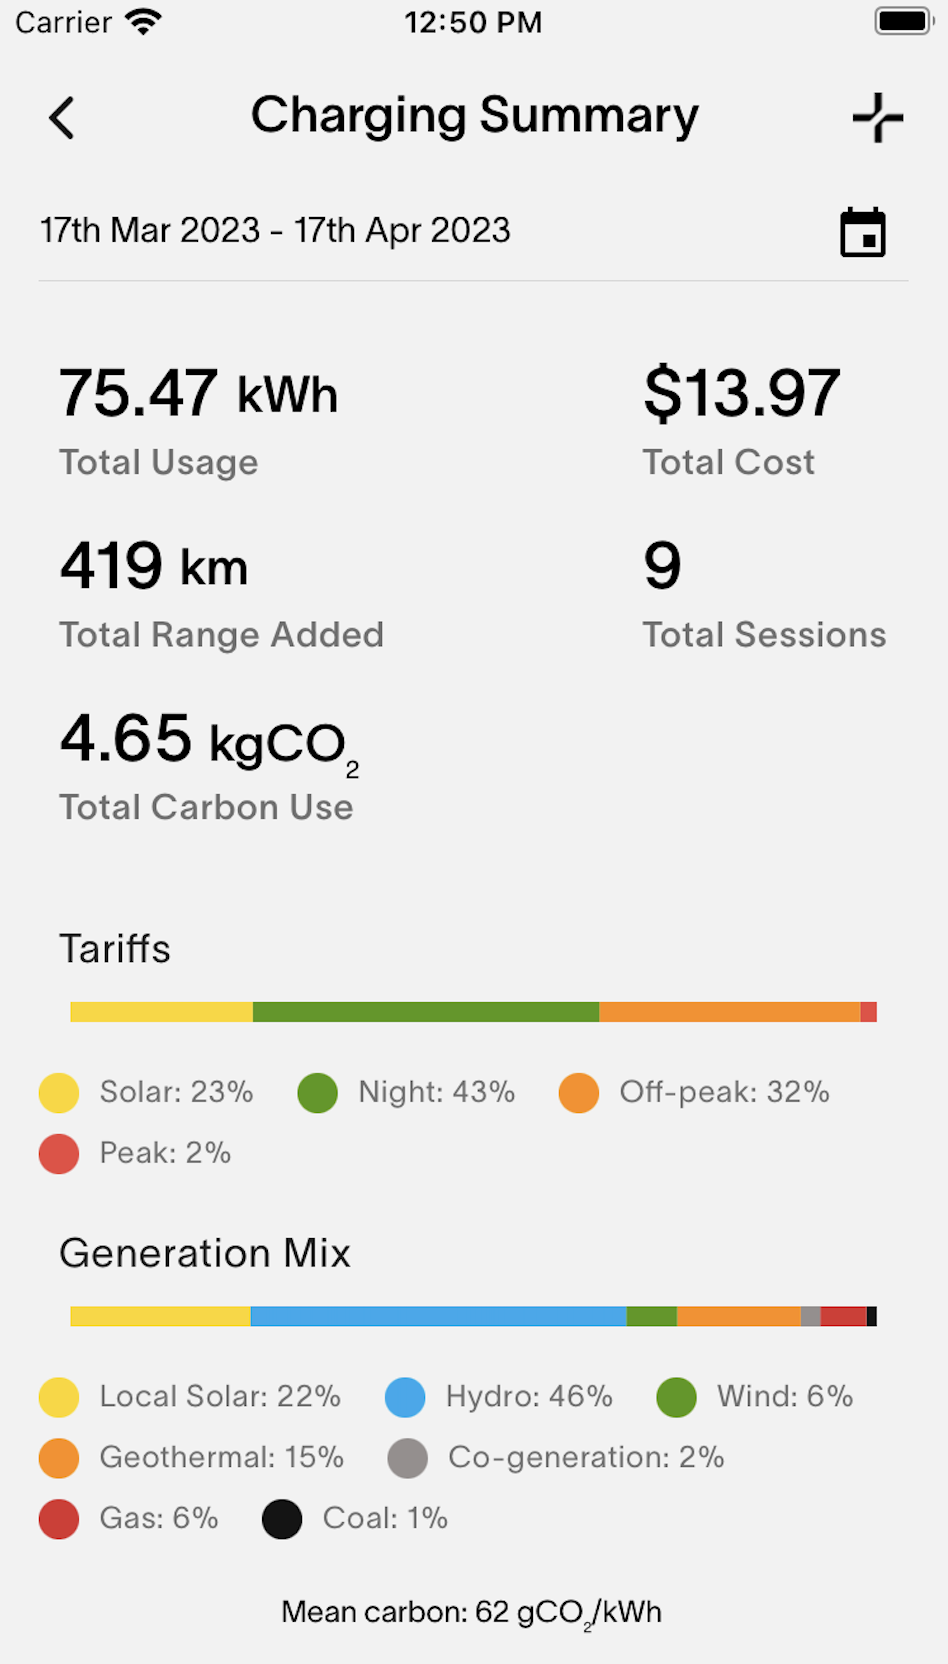 Charging Summary page showing your carbon emission totals